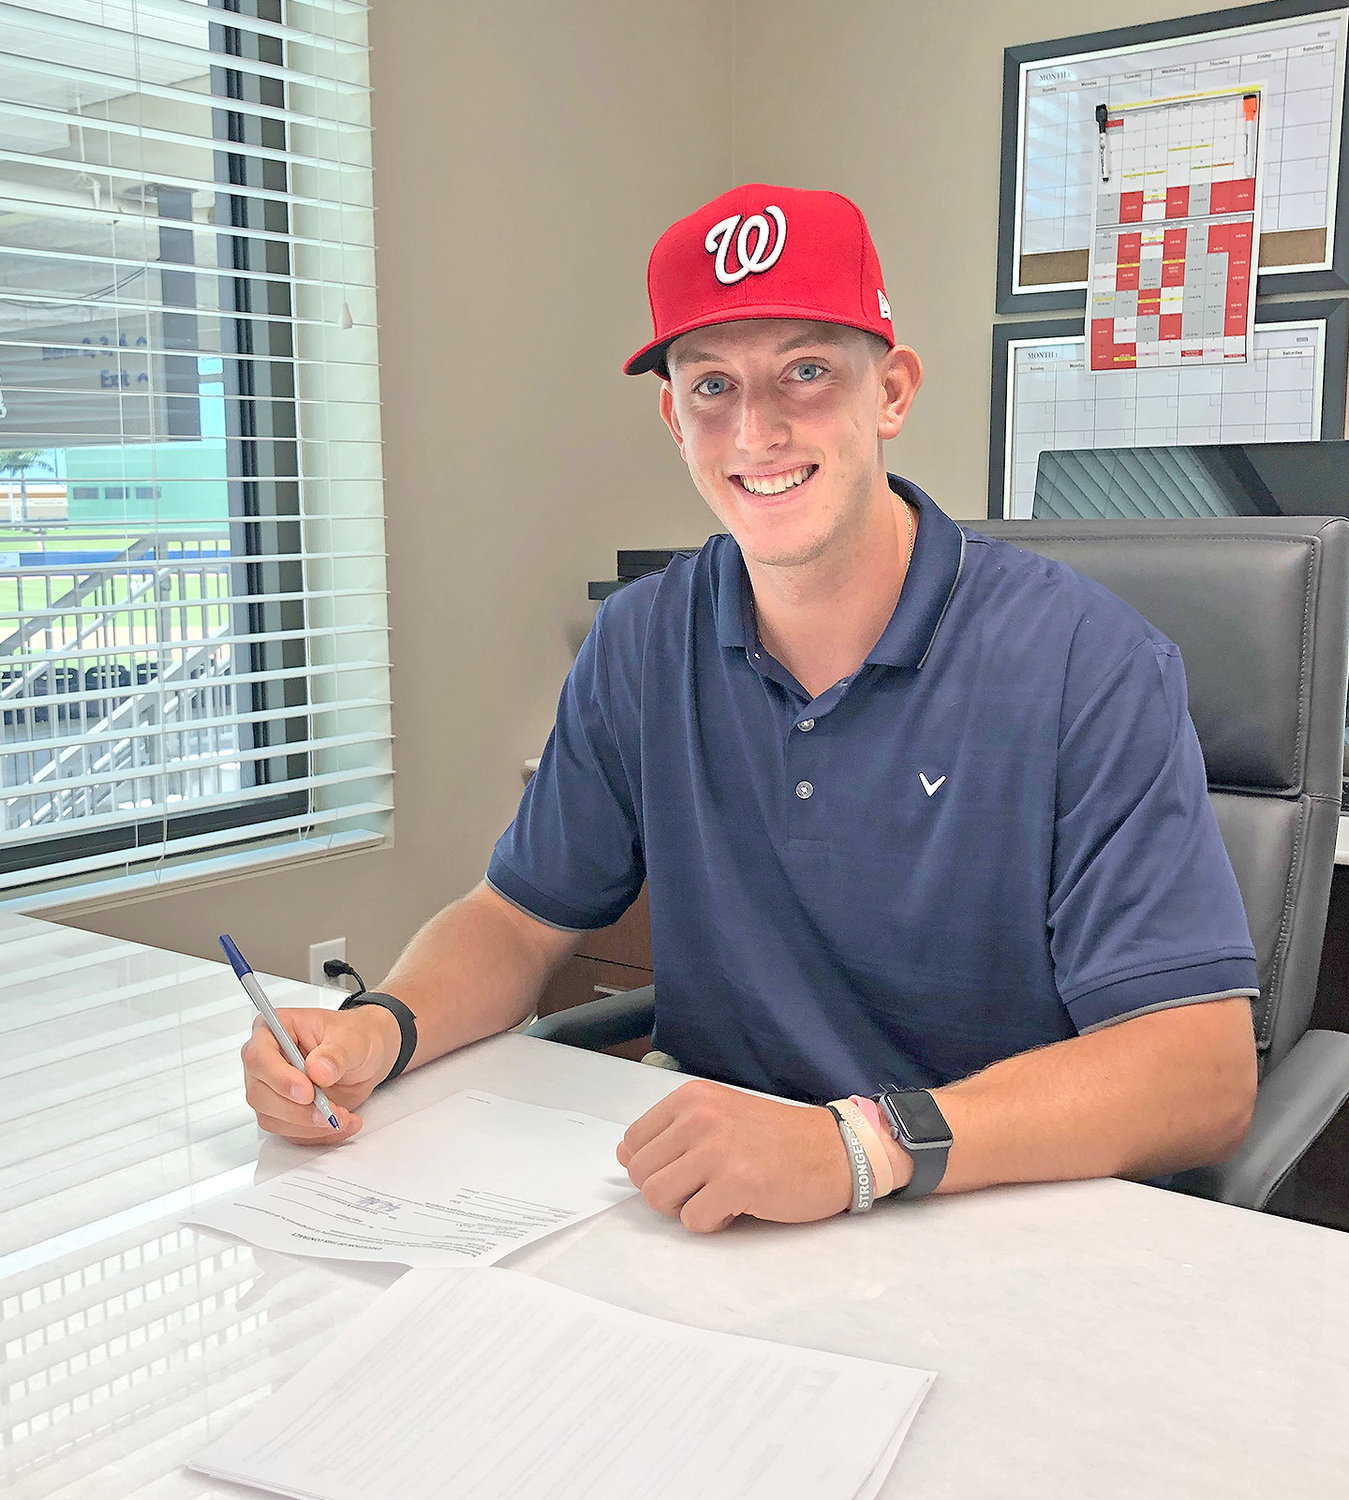 MAJOR LEAGUE DEAL — Tyler Schoff, who pitched for Rome Free Academy and then Division I Bryant University, has signed a free agent rookie contract with the Washington Nationals organization. Schoff, a 6-foot-4 right-handed starter, was 7-1 with a 3.12 ERA in his senior year at Bryant. He threw 69 1/3 innings and struck out 72 batters. He was a second-team All-Northeast Conference selection this spring. Now he joins the Nationals, who won the 2019 World Series.